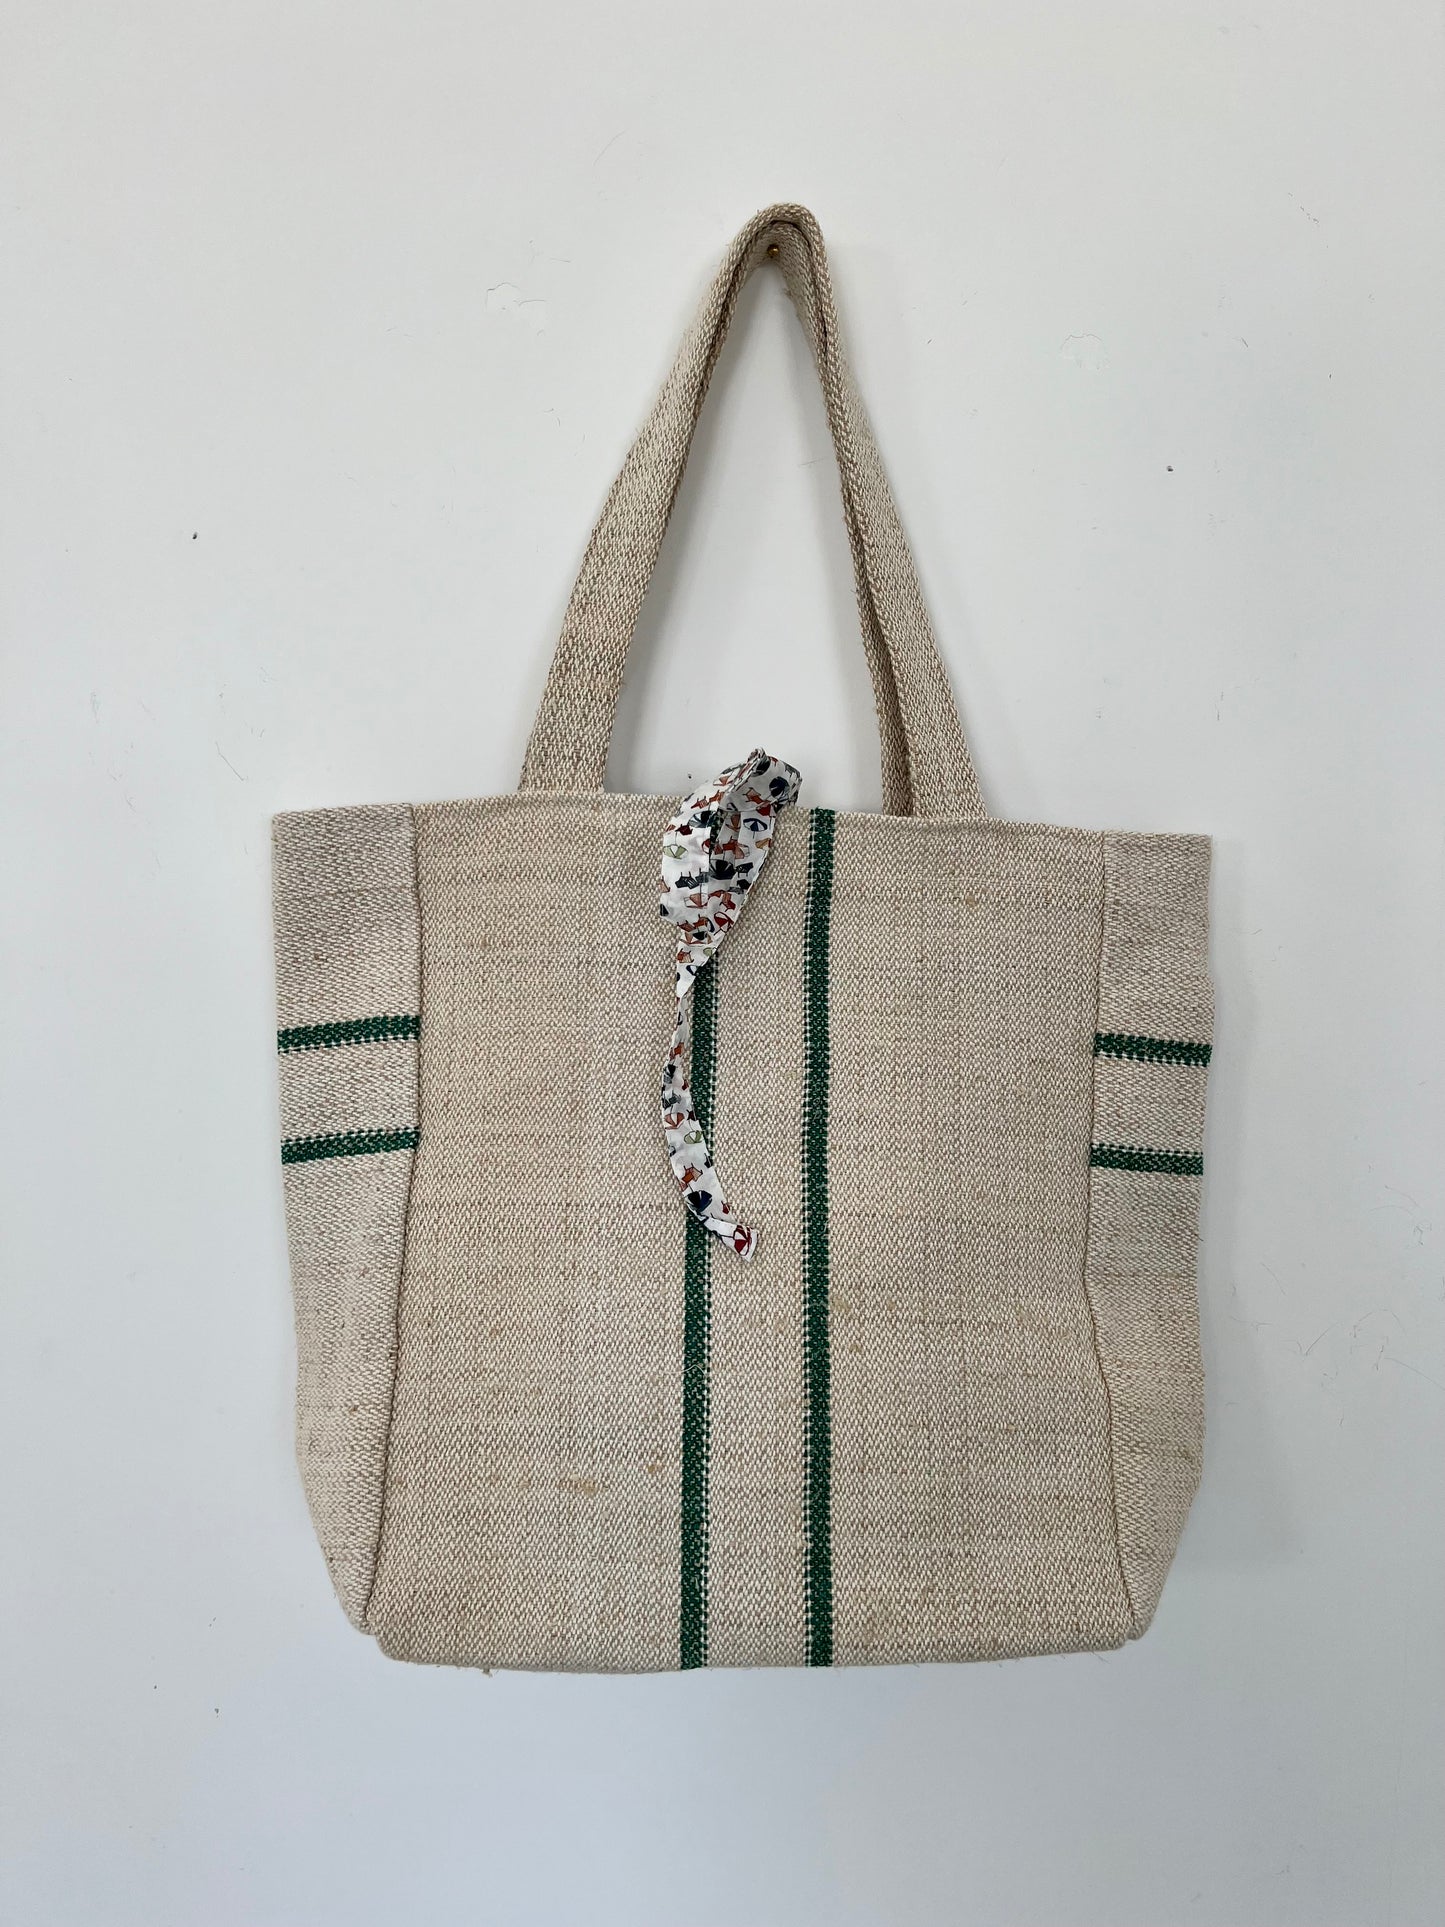 Bag - Grano Green Stipes bag with Ombrellone Print